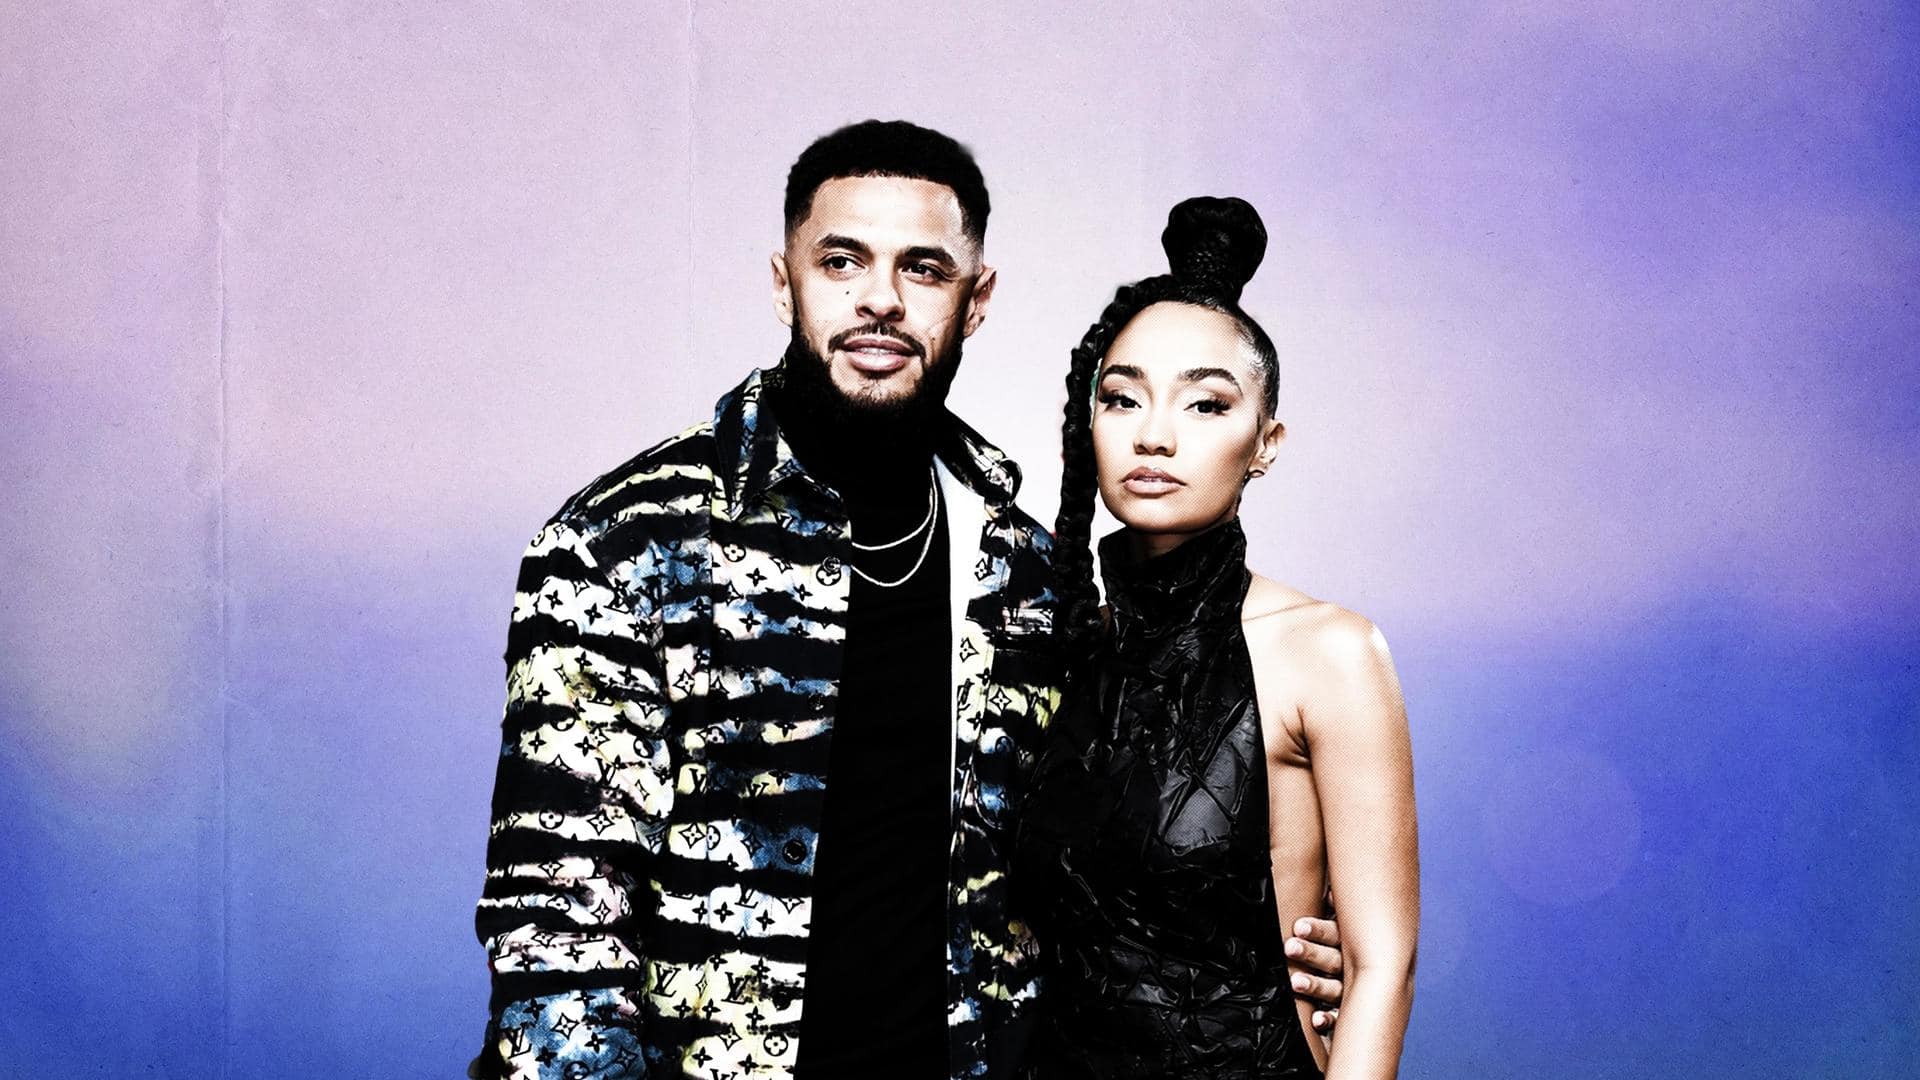 Love is in the air: Leigh-Anne Pinnock-Andre Gray's relationship timeline